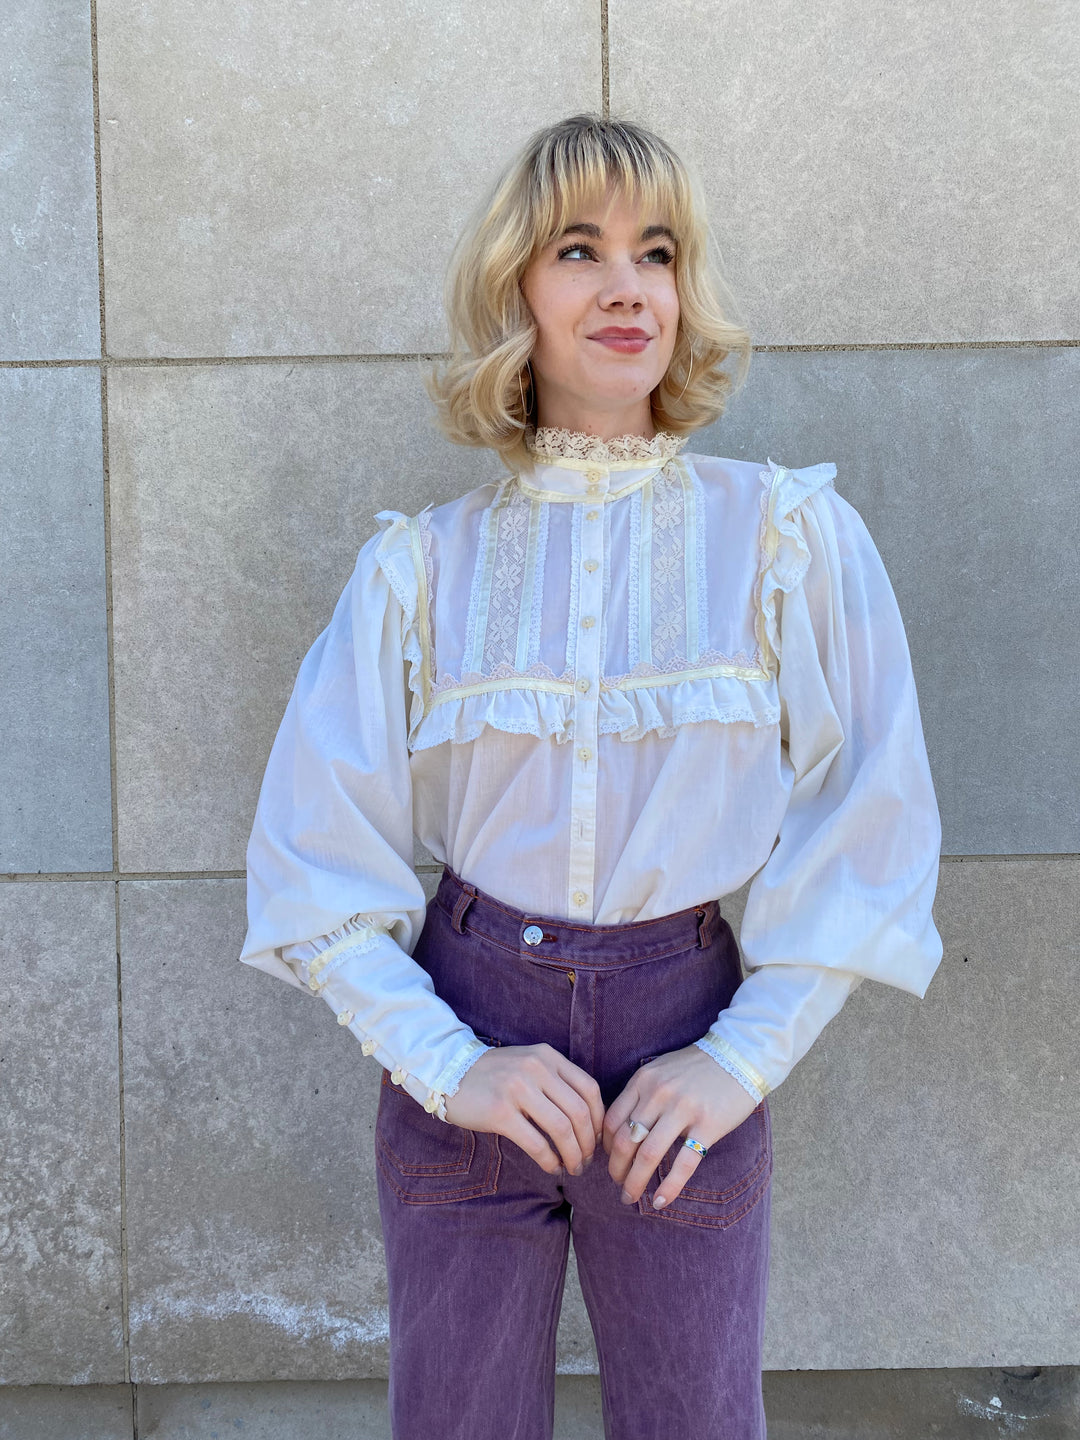 70s Ivory Blouse, Lace trim by Jessica's Gunnies